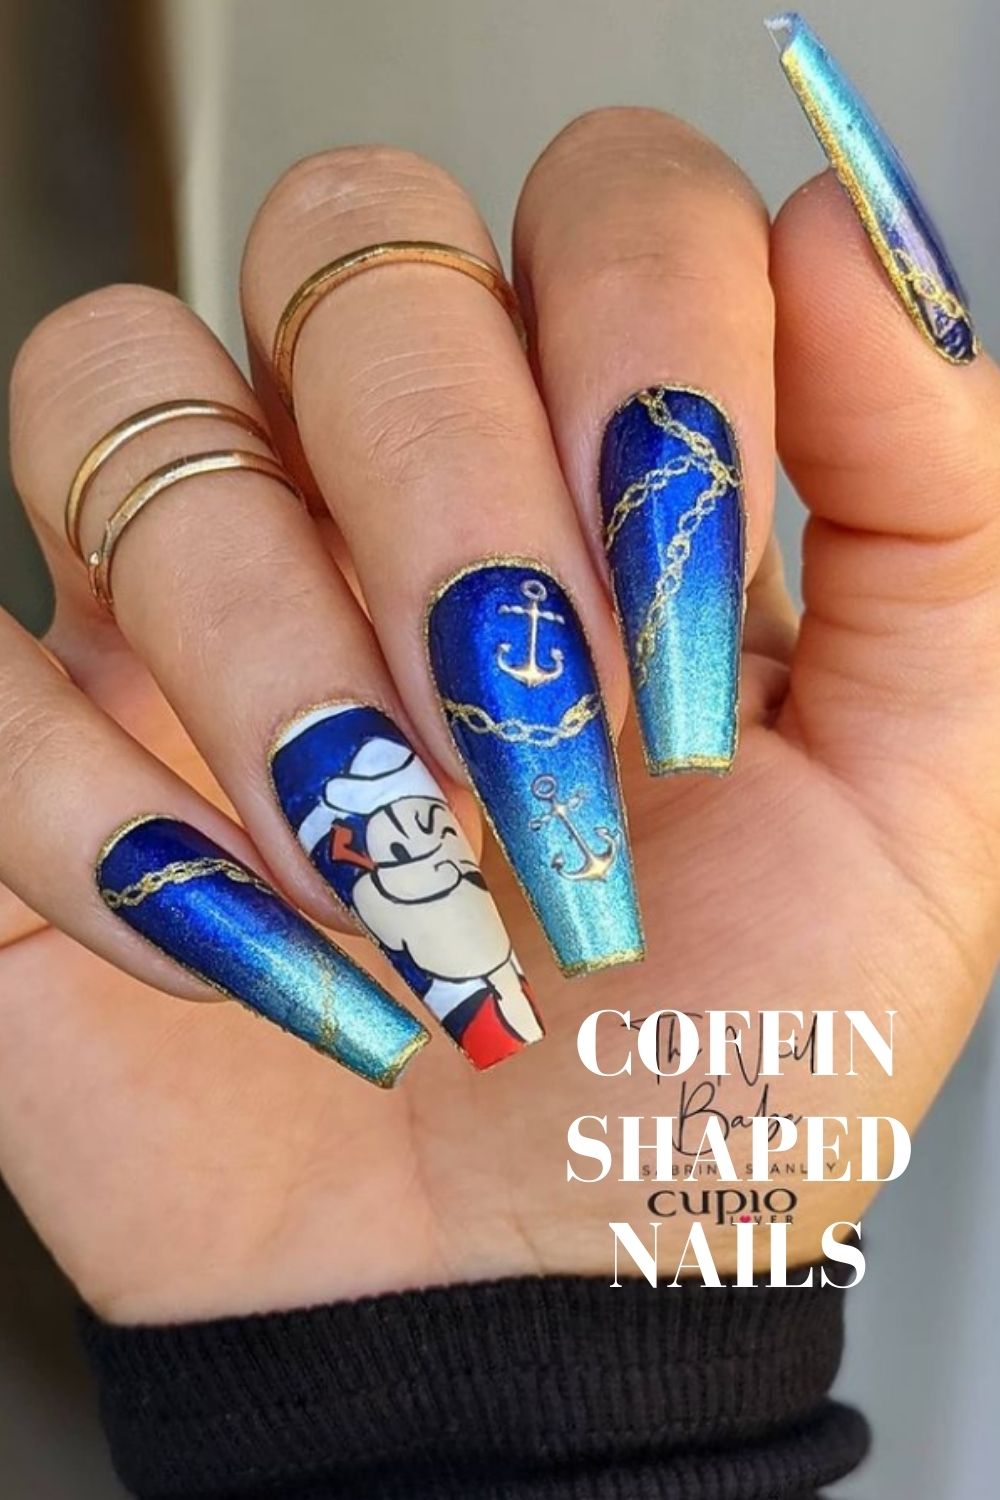 Long coffin nails